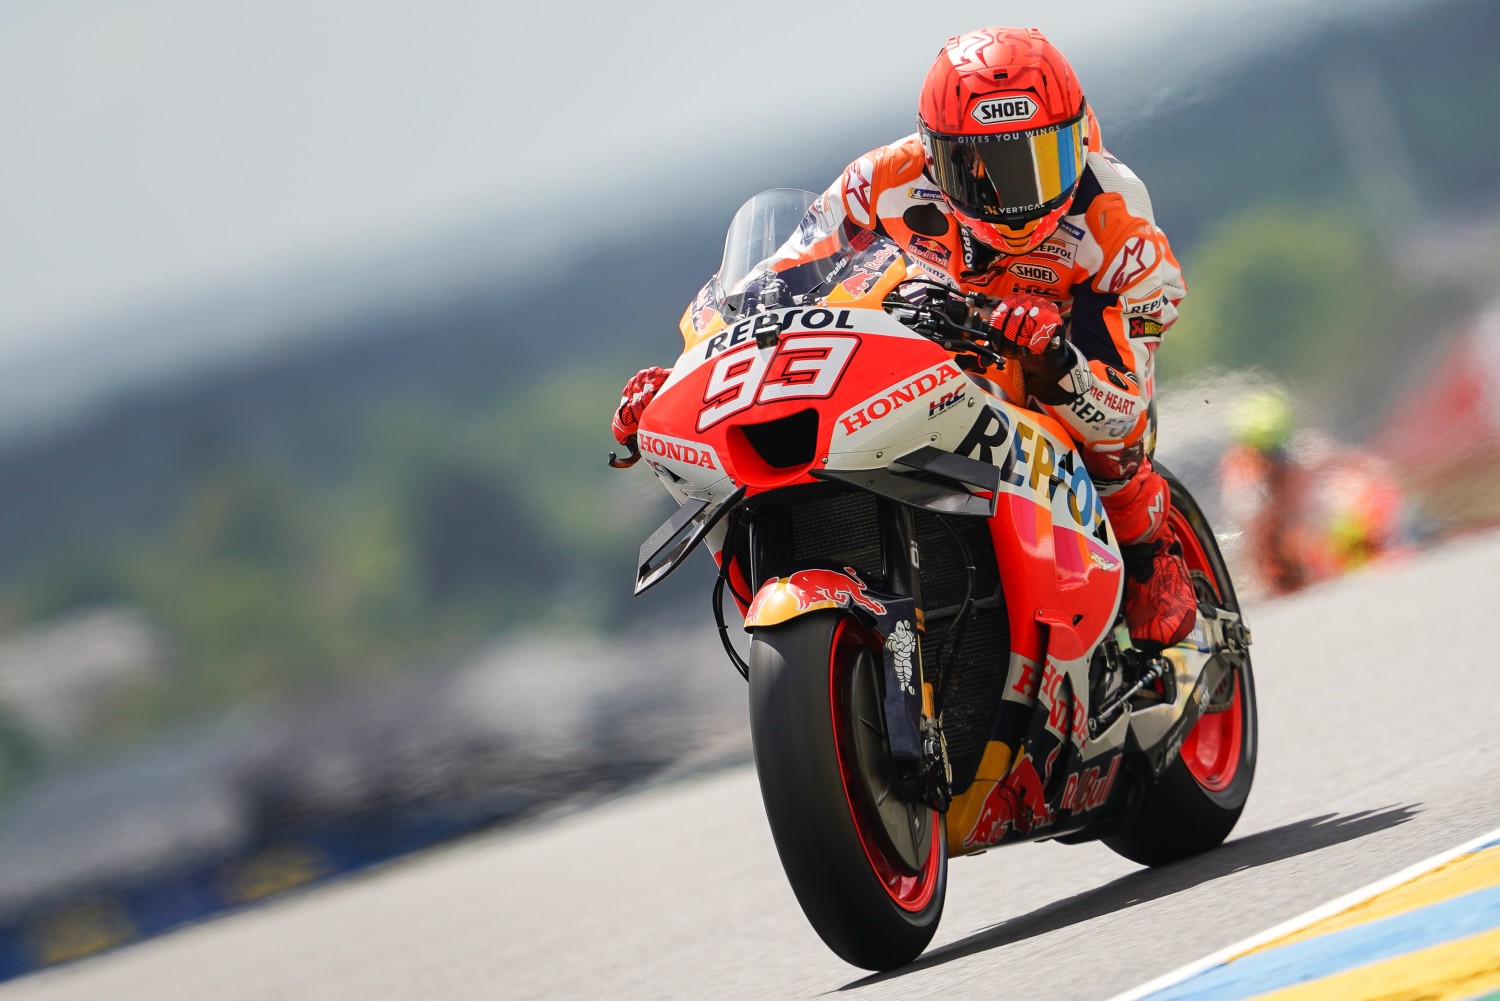 Le Mans 2023 - Marc Marquez did not expect to challenge for pole on his return